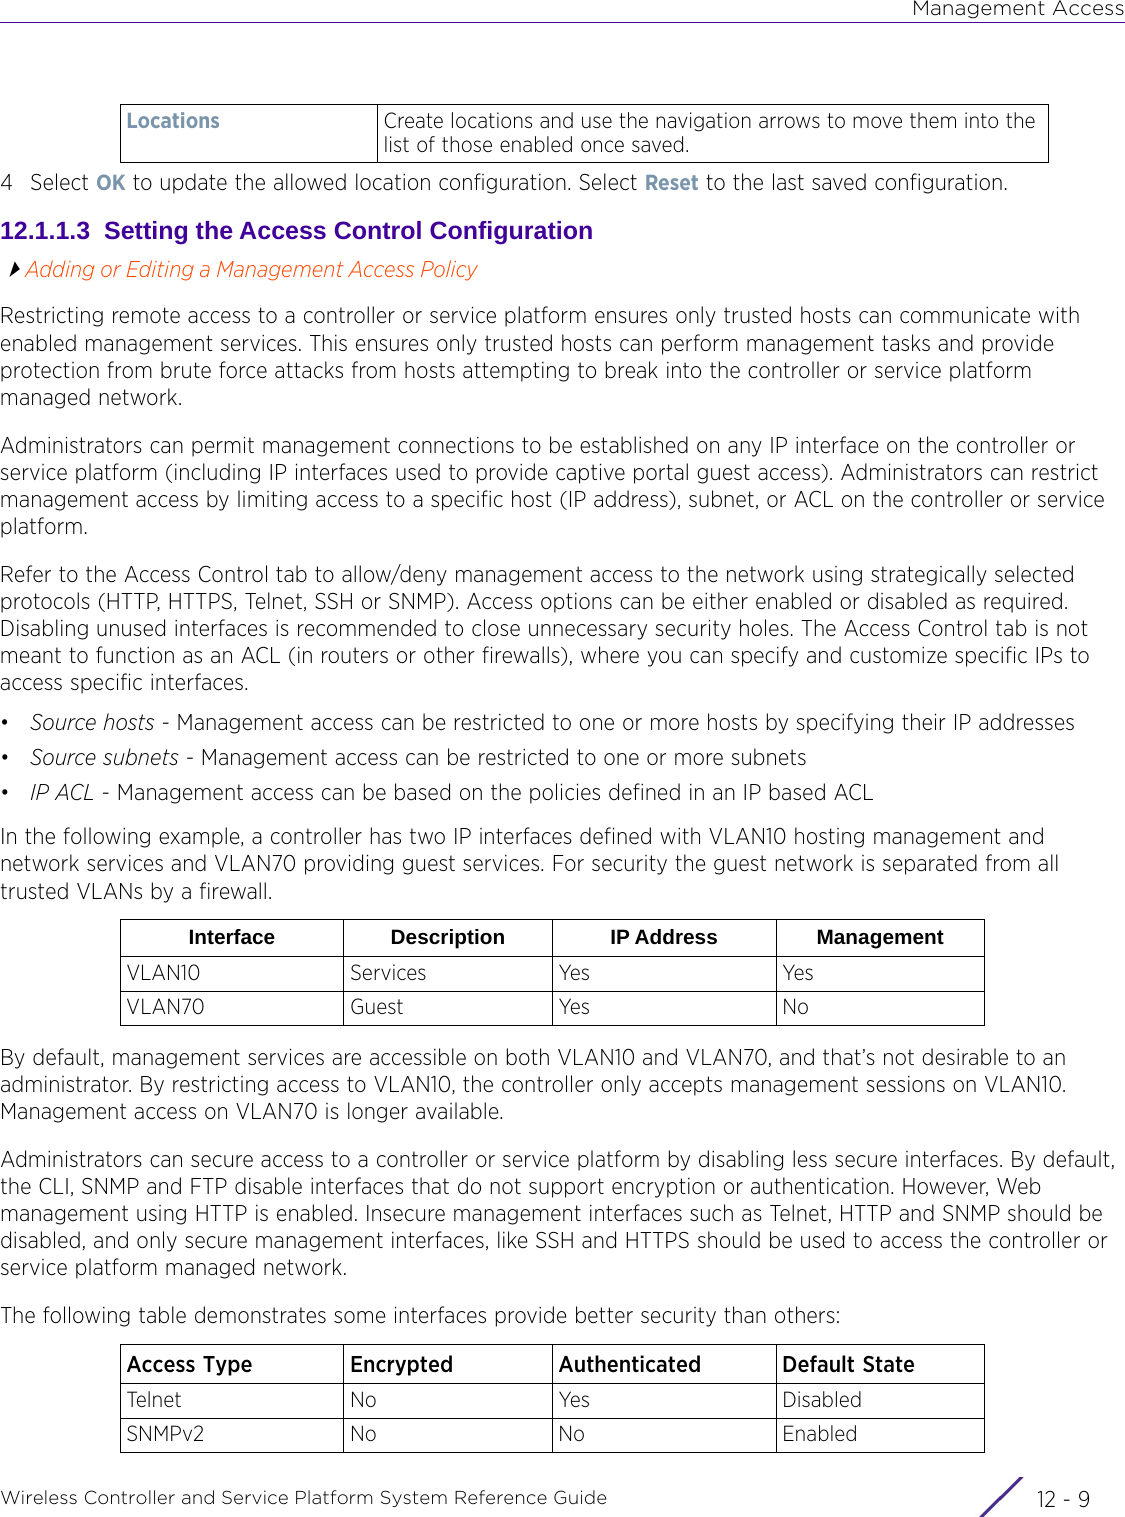 Management AccessWireless Controller and Service Platform System Reference Guide 12 - 94Select OK to update the allowed location configuration. Select Reset to the last saved configuration.12.1.1.3  Setting the Access Control ConfigurationAdding or Editing a Management Access PolicyRestricting remote access to a controller or service platform ensures only trusted hosts can communicate with enabled management services. This ensures only trusted hosts can perform management tasks and provide protection from brute force attacks from hosts attempting to break into the controller or service platform managed network.Administrators can permit management connections to be established on any IP interface on the controller or service platform (including IP interfaces used to provide captive portal guest access). Administrators can restrict management access by limiting access to a specific host (IP address), subnet, or ACL on the controller or service platform.Refer to the Access Control tab to allow/deny management access to the network using strategically selected protocols (HTTP, HTTPS, Telnet, SSH or SNMP). Access options can be either enabled or disabled as required. Disabling unused interfaces is recommended to close unnecessary security holes. The Access Control tab is not meant to function as an ACL (in routers or other firewalls), where you can specify and customize specific IPs to access specific interfaces. •Source hosts - Management access can be restricted to one or more hosts by specifying their IP addresses•Source subnets - Management access can be restricted to one or more subnets•IP ACL - Management access can be based on the policies defined in an IP based ACLIn the following example, a controller has two IP interfaces defined with VLAN10 hosting management and network services and VLAN70 providing guest services. For security the guest network is separated from all trusted VLANs by a firewall.By default, management services are accessible on both VLAN10 and VLAN70, and that’s not desirable to an administrator. By restricting access to VLAN10, the controller only accepts management sessions on VLAN10. Management access on VLAN70 is longer available.Administrators can secure access to a controller or service platform by disabling less secure interfaces. By default, the CLI, SNMP and FTP disable interfaces that do not support encryption or authentication. However, Web management using HTTP is enabled. Insecure management interfaces such as Telnet, HTTP and SNMP should be disabled, and only secure management interfaces, like SSH and HTTPS should be used to access the controller or service platform managed network.The following table demonstrates some interfaces provide better security than others:   Locations Create locations and use the navigation arrows to move them into the list of those enabled once saved.Interface Description IP Address ManagementVLAN10 Services Yes YesVLAN70 Guest Yes NoAccess Type Encrypted Authenticated Default StateTelnet No Yes DisabledSNMPv2 No No Enabled